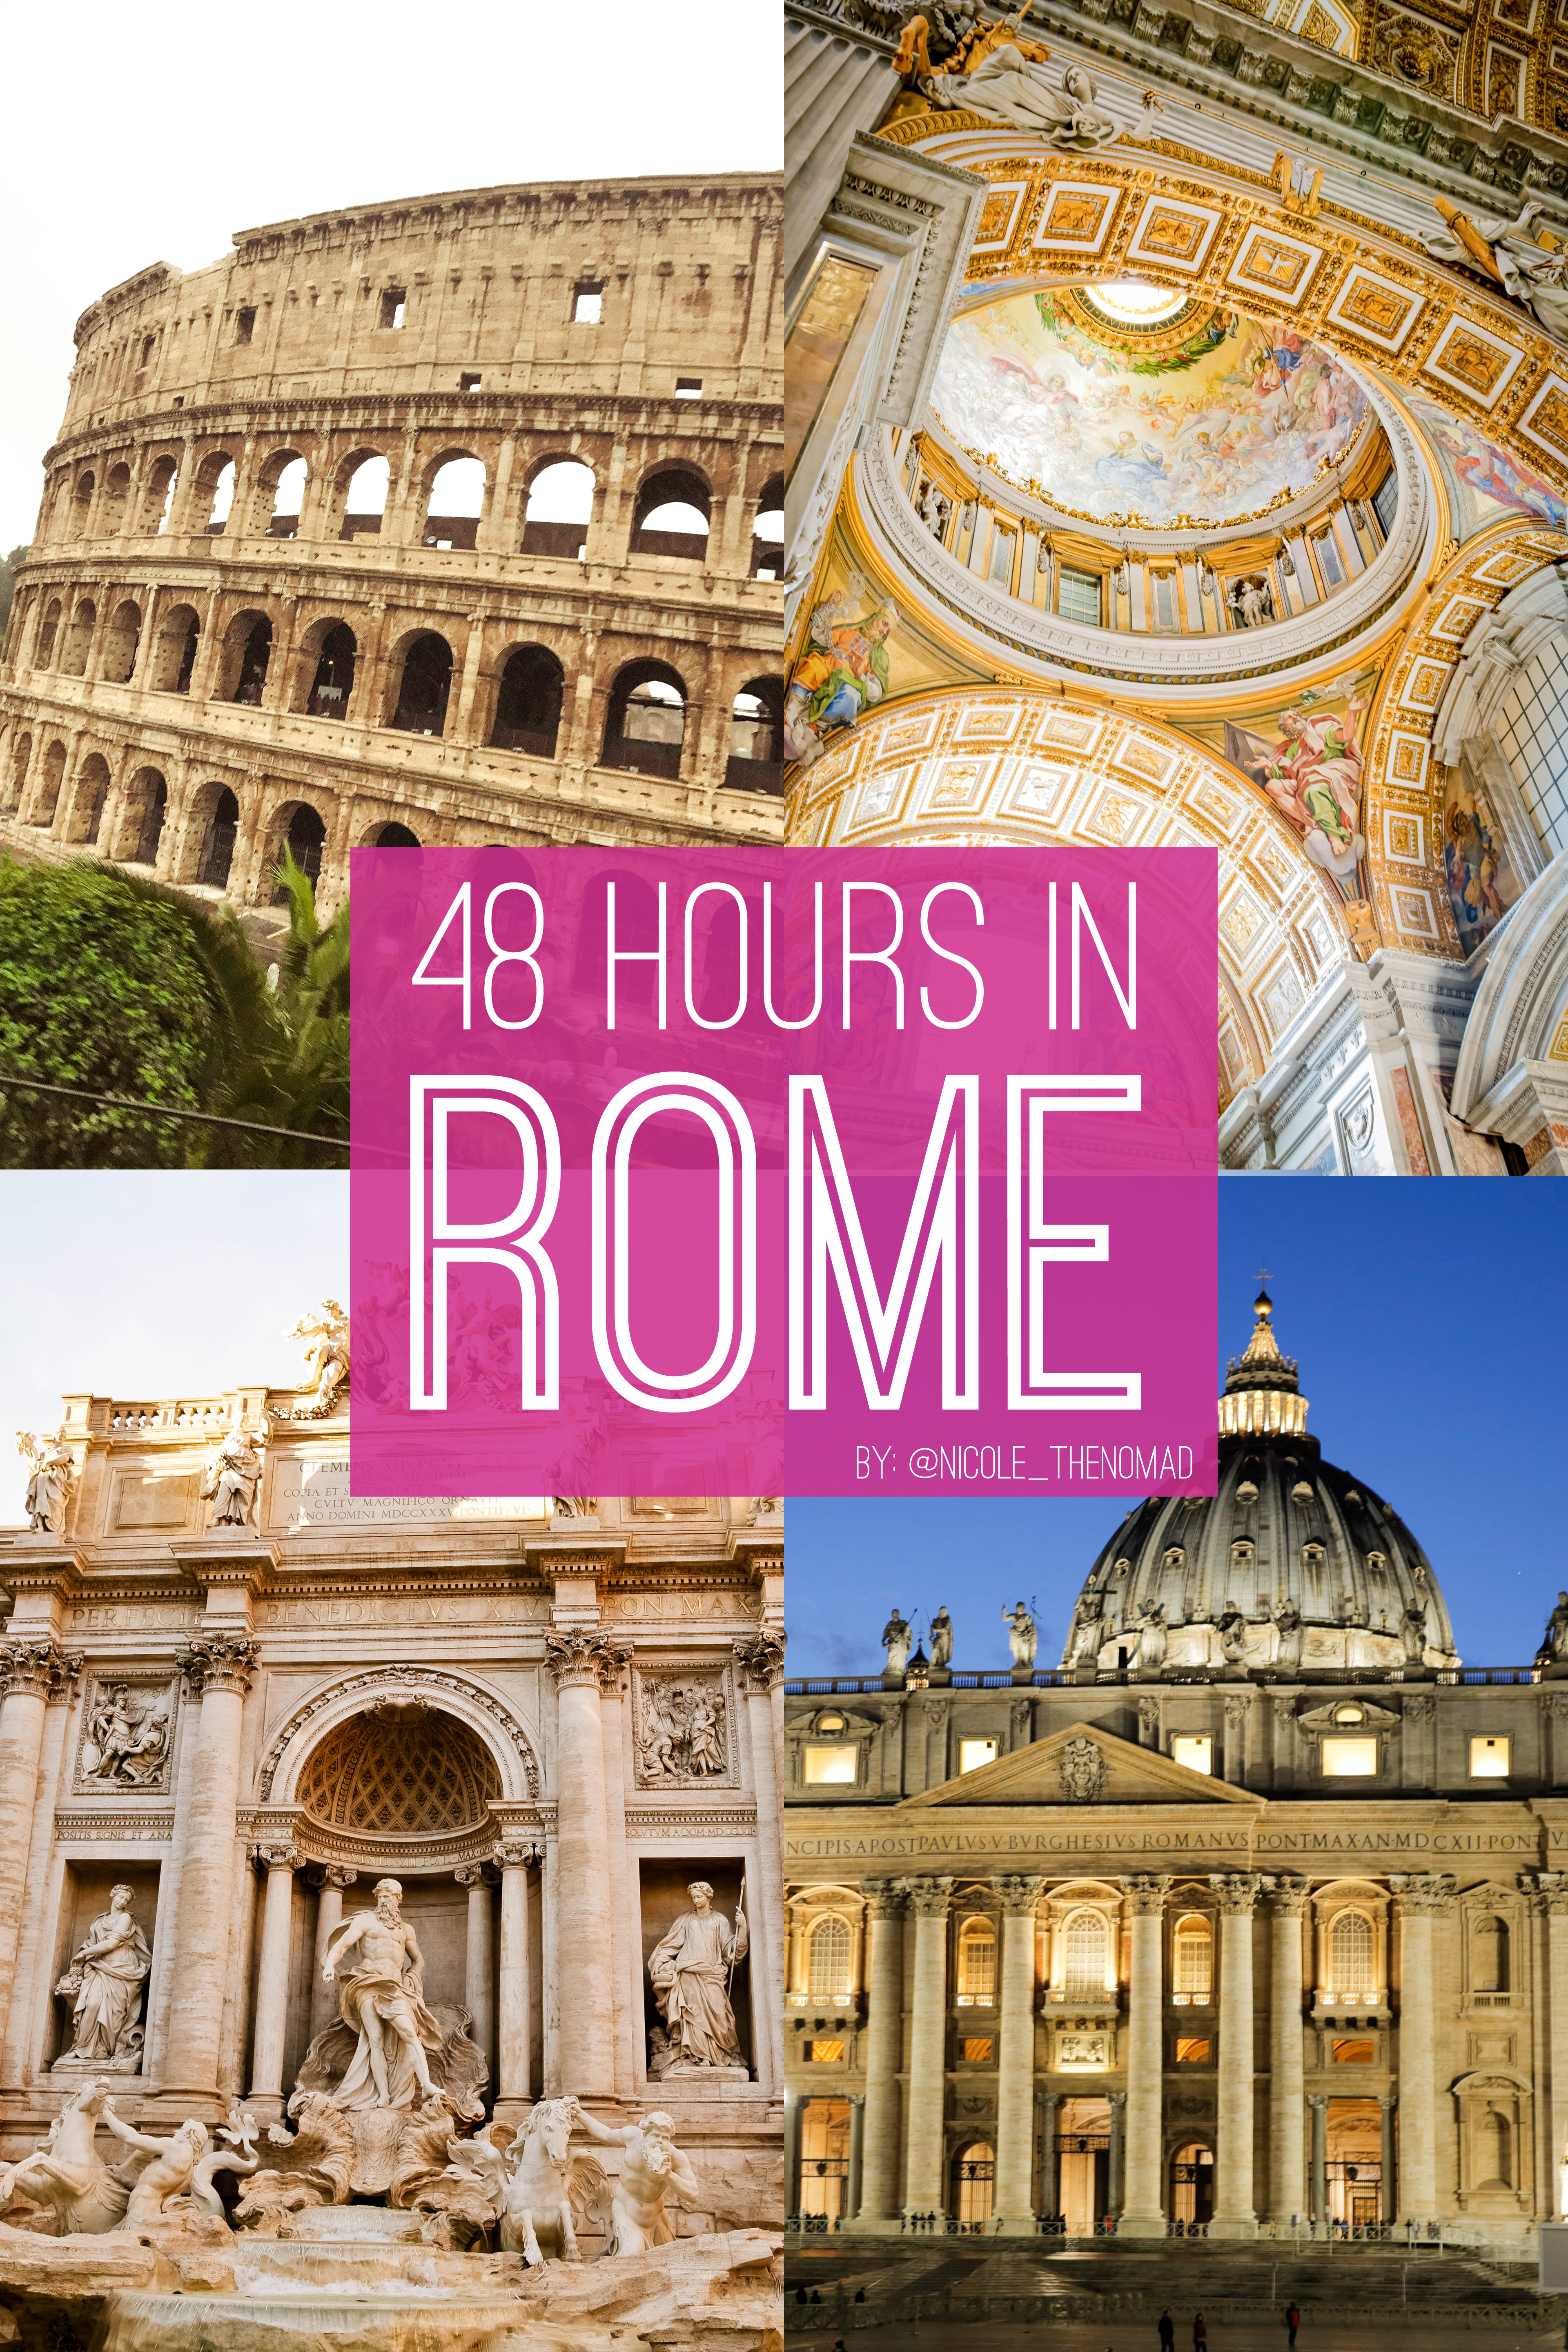 48 hours in Rome